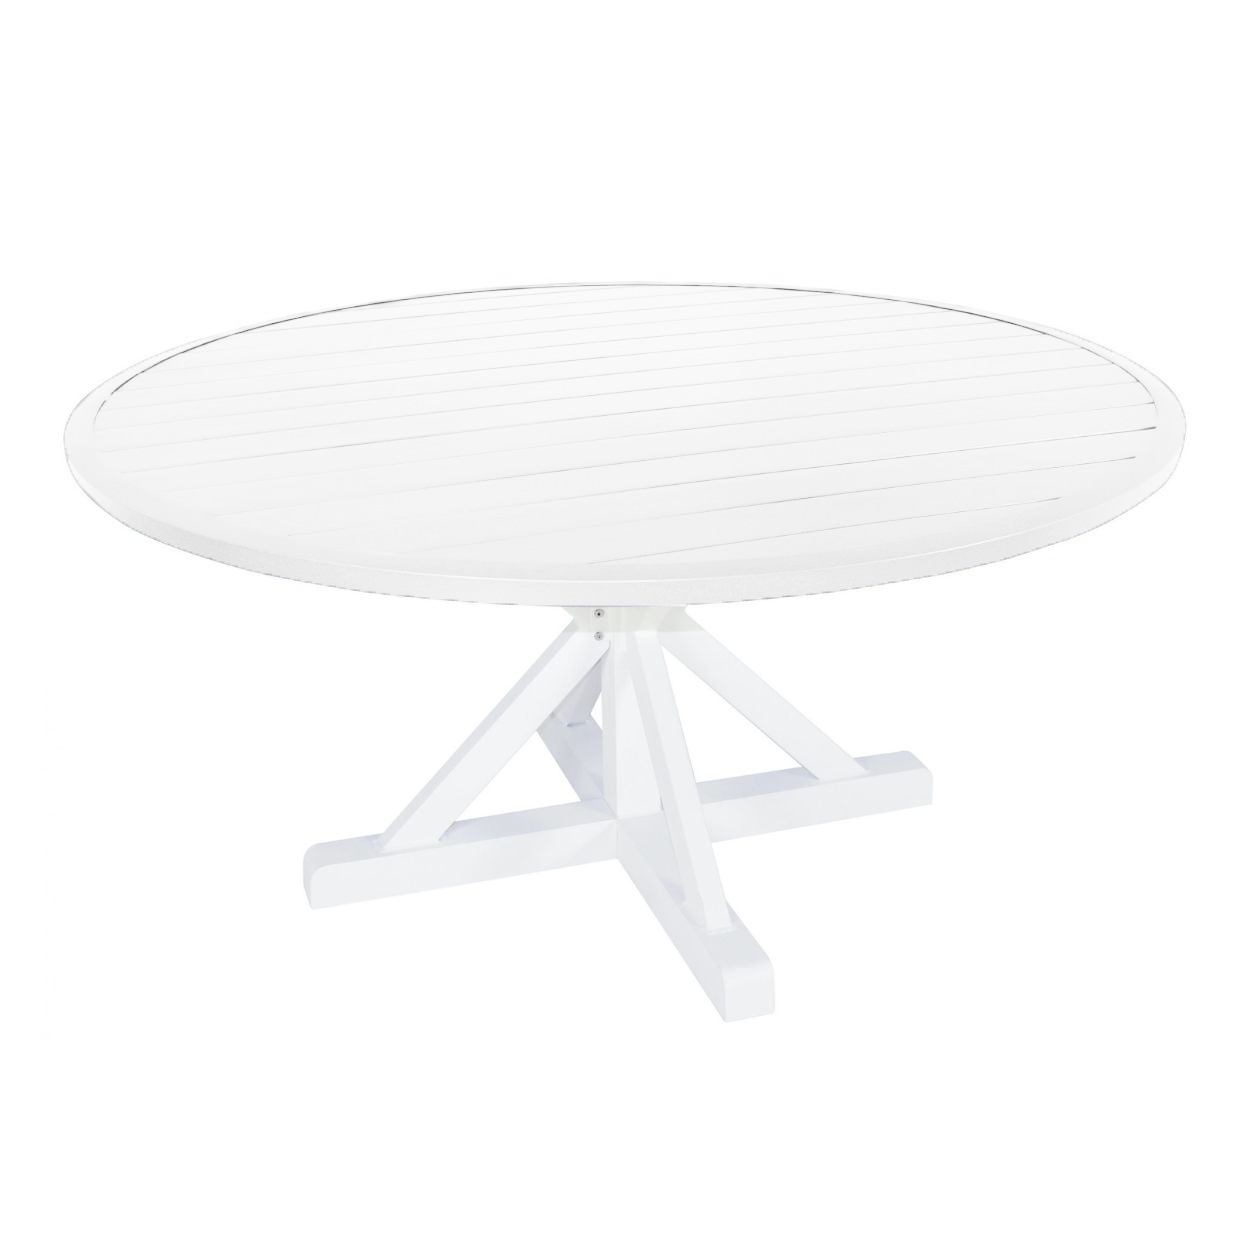 Hamptons Round Dining Table - White